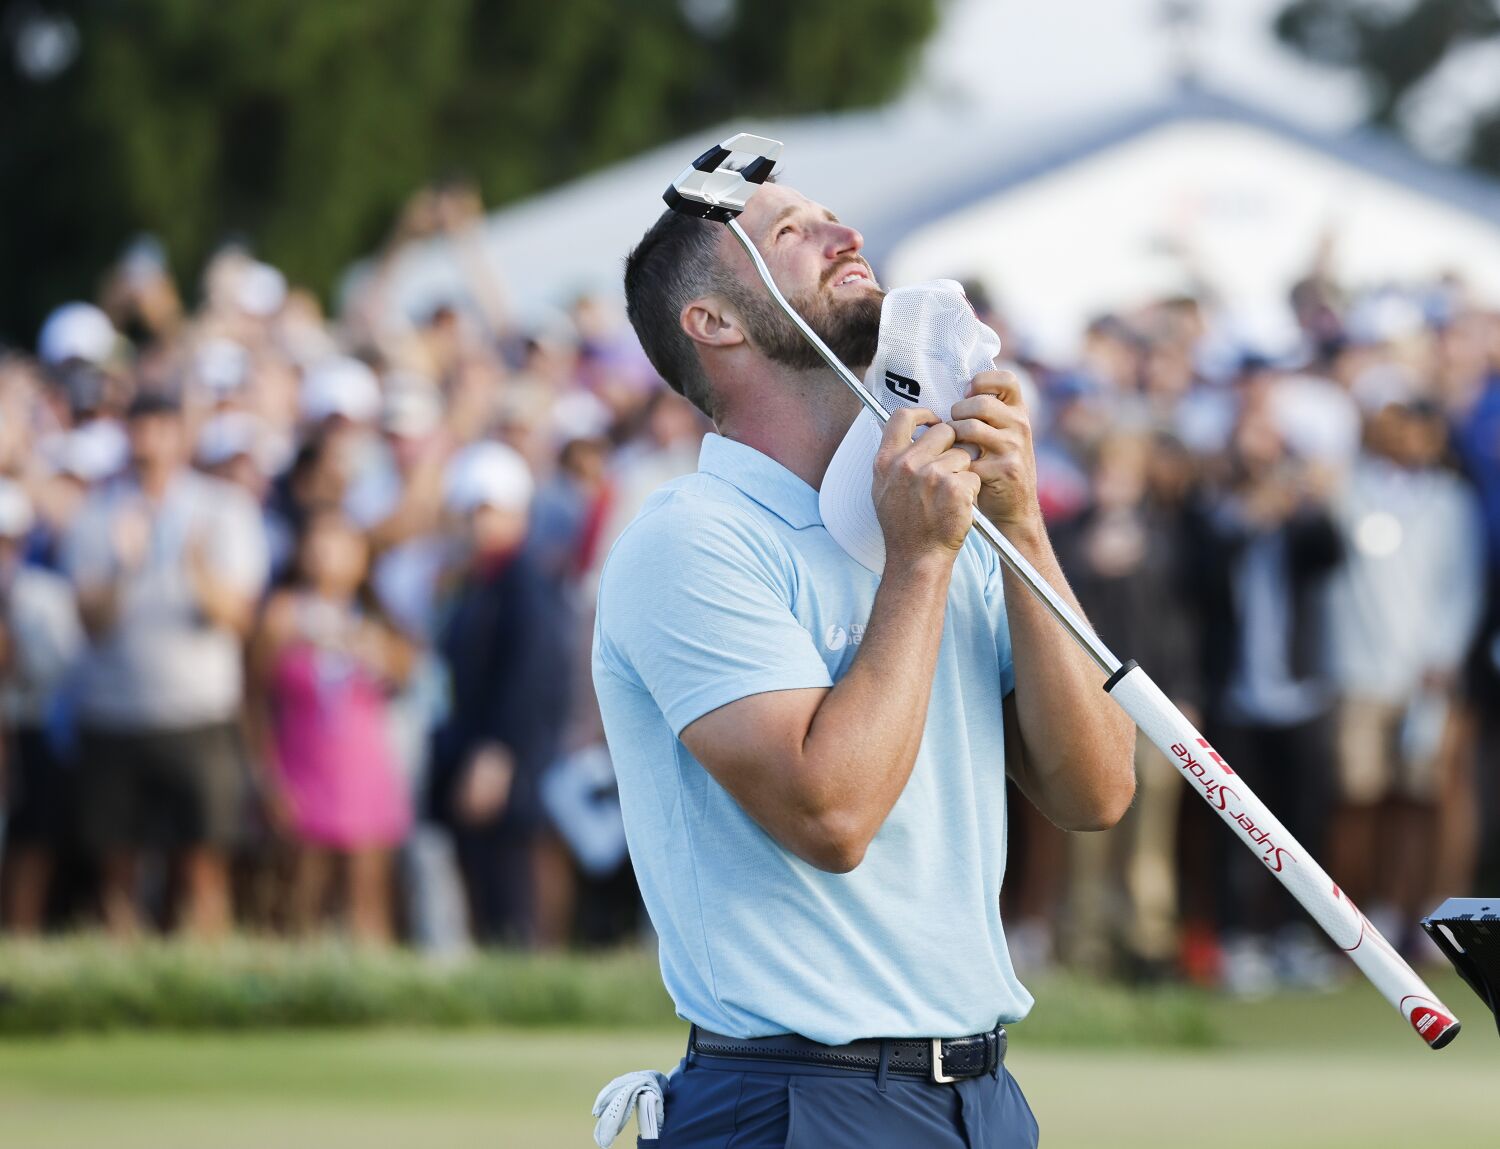 Wyndham Clark defies the odds and outlasts Rory McIlroy to win U.S. Open